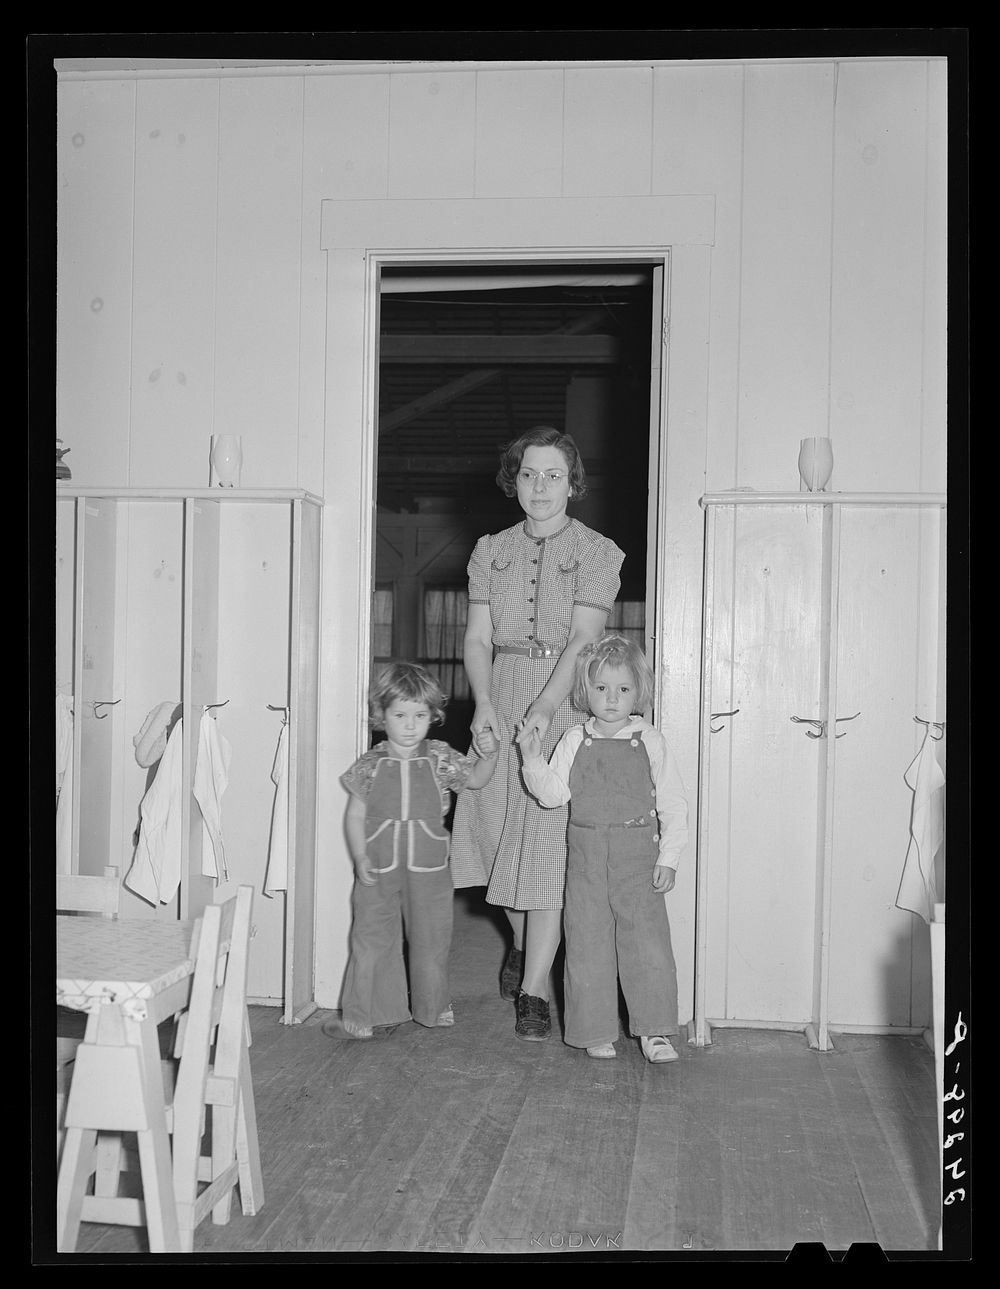 Nursery. Shafter migrant camp. Shafter, California. Sourced from the Library of Congress.